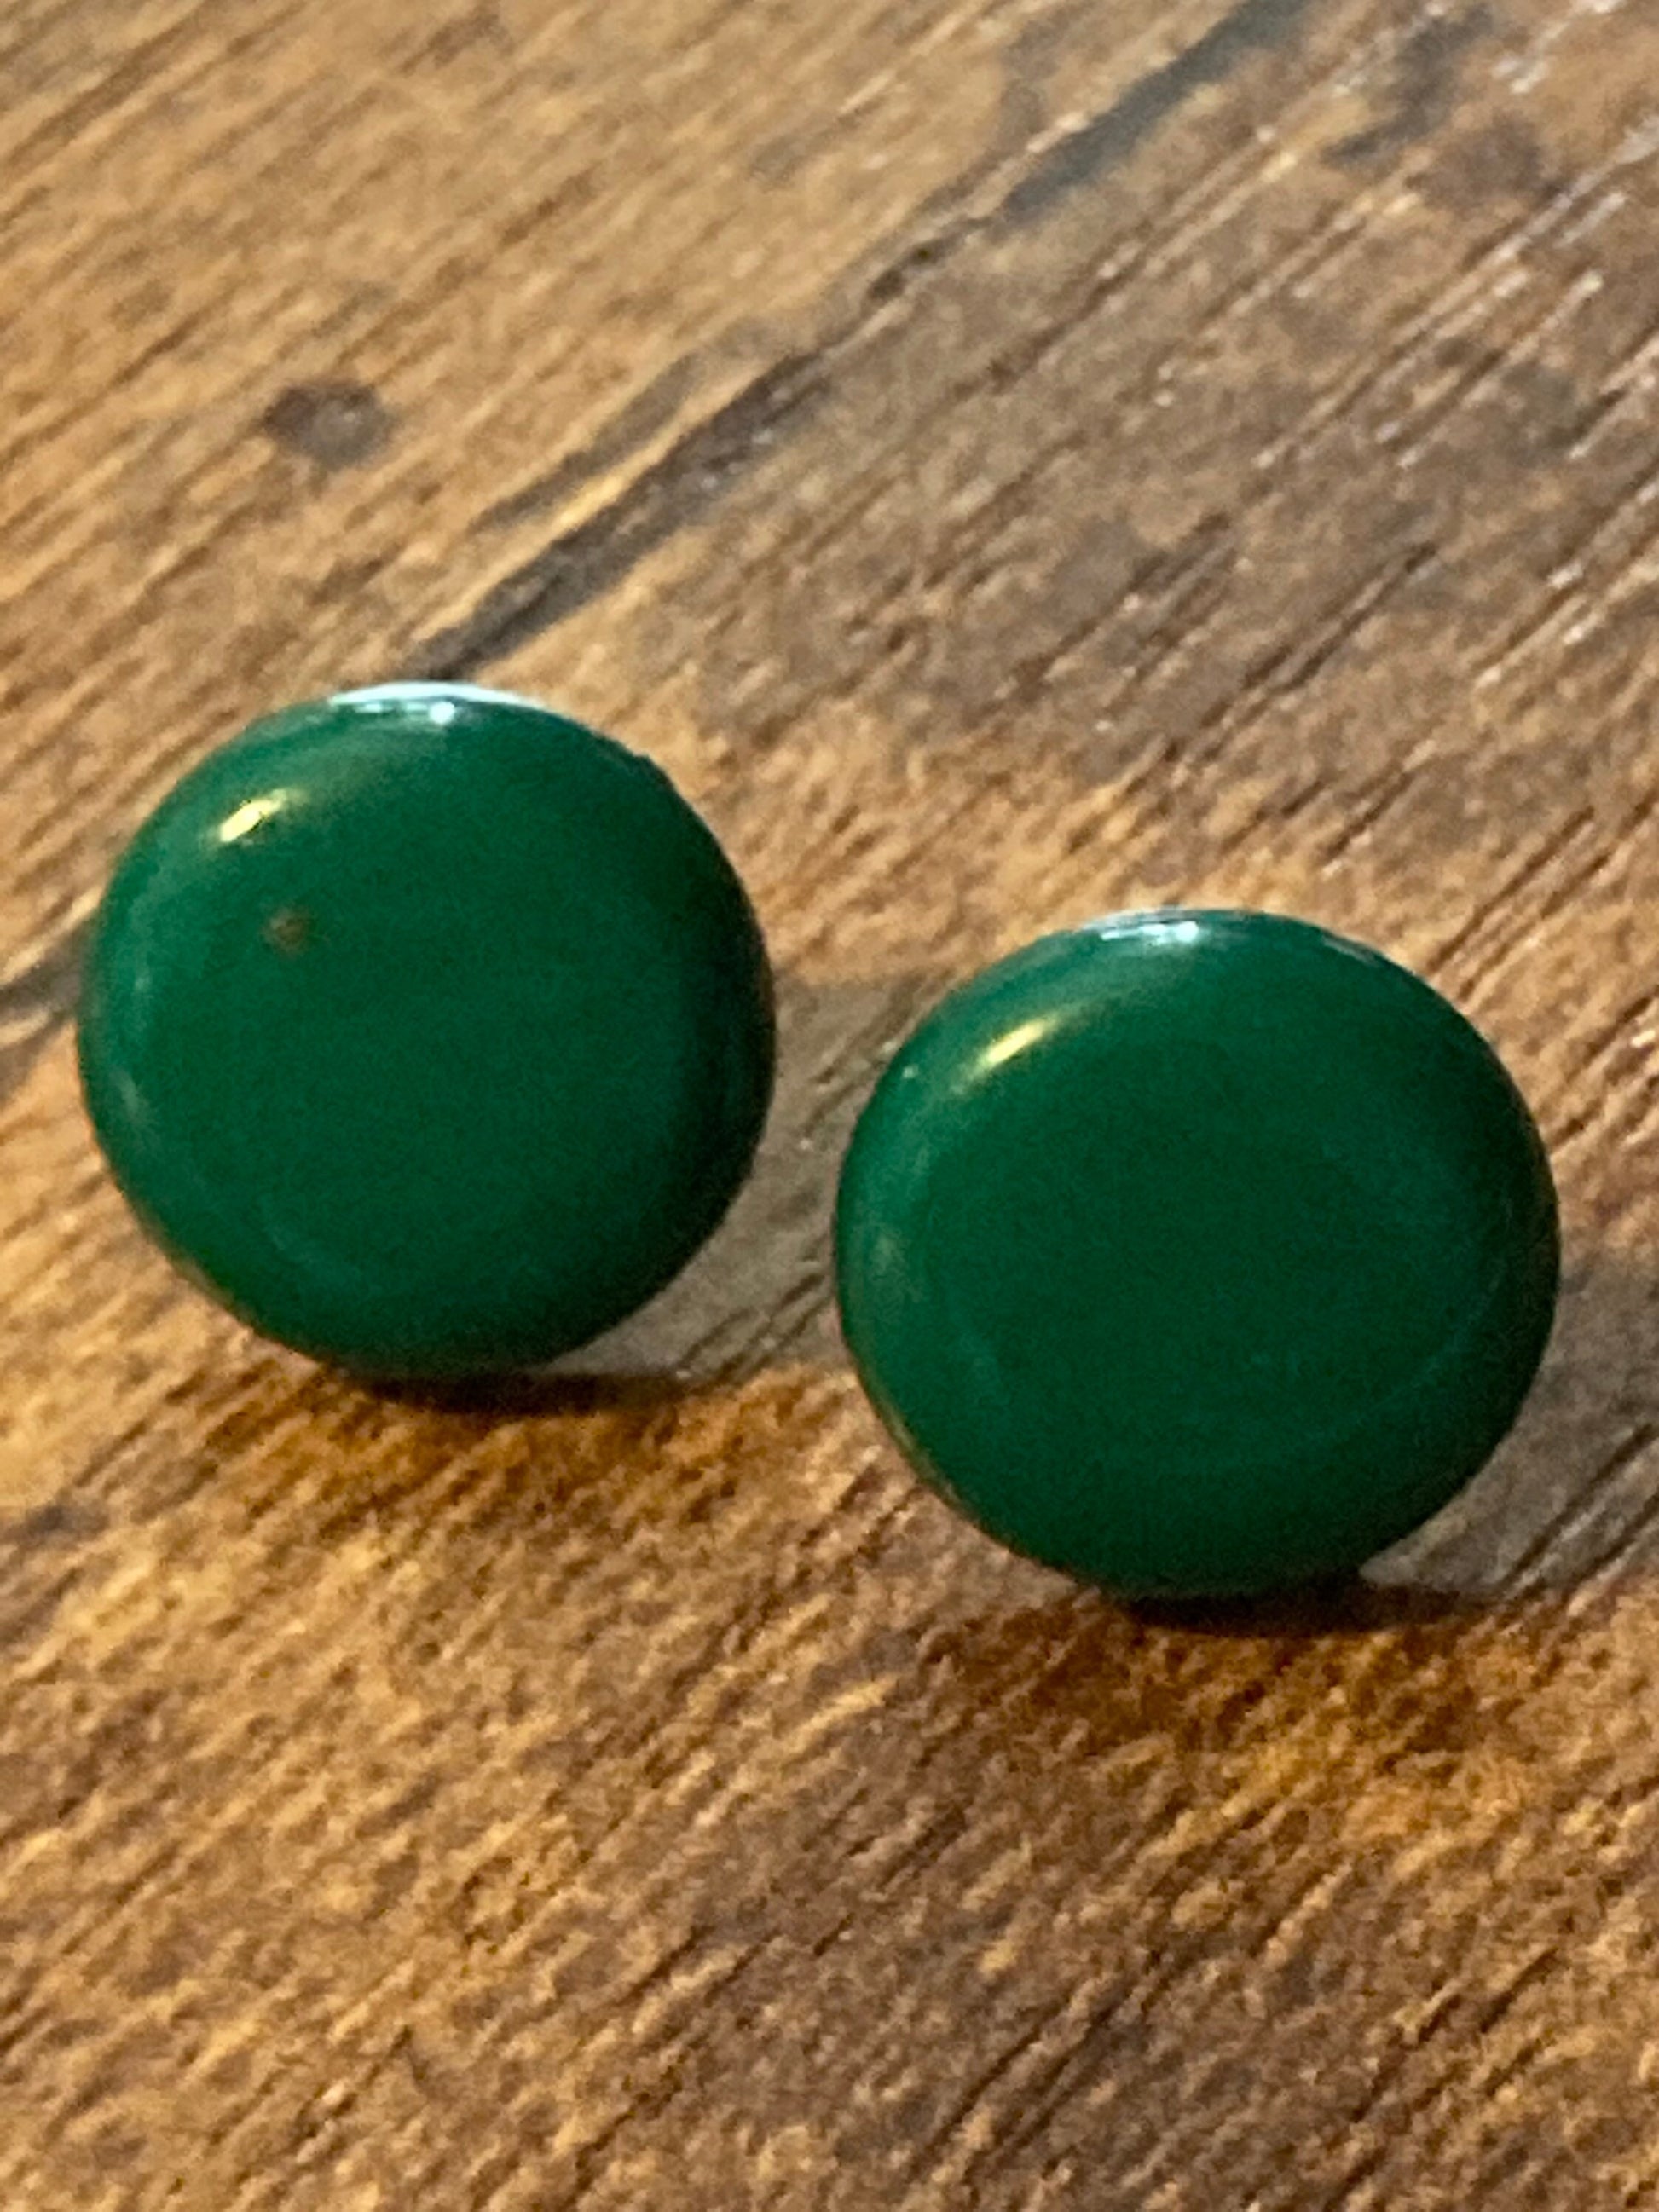 Small Green Retro Round plastic button stud earrings for pierced ears